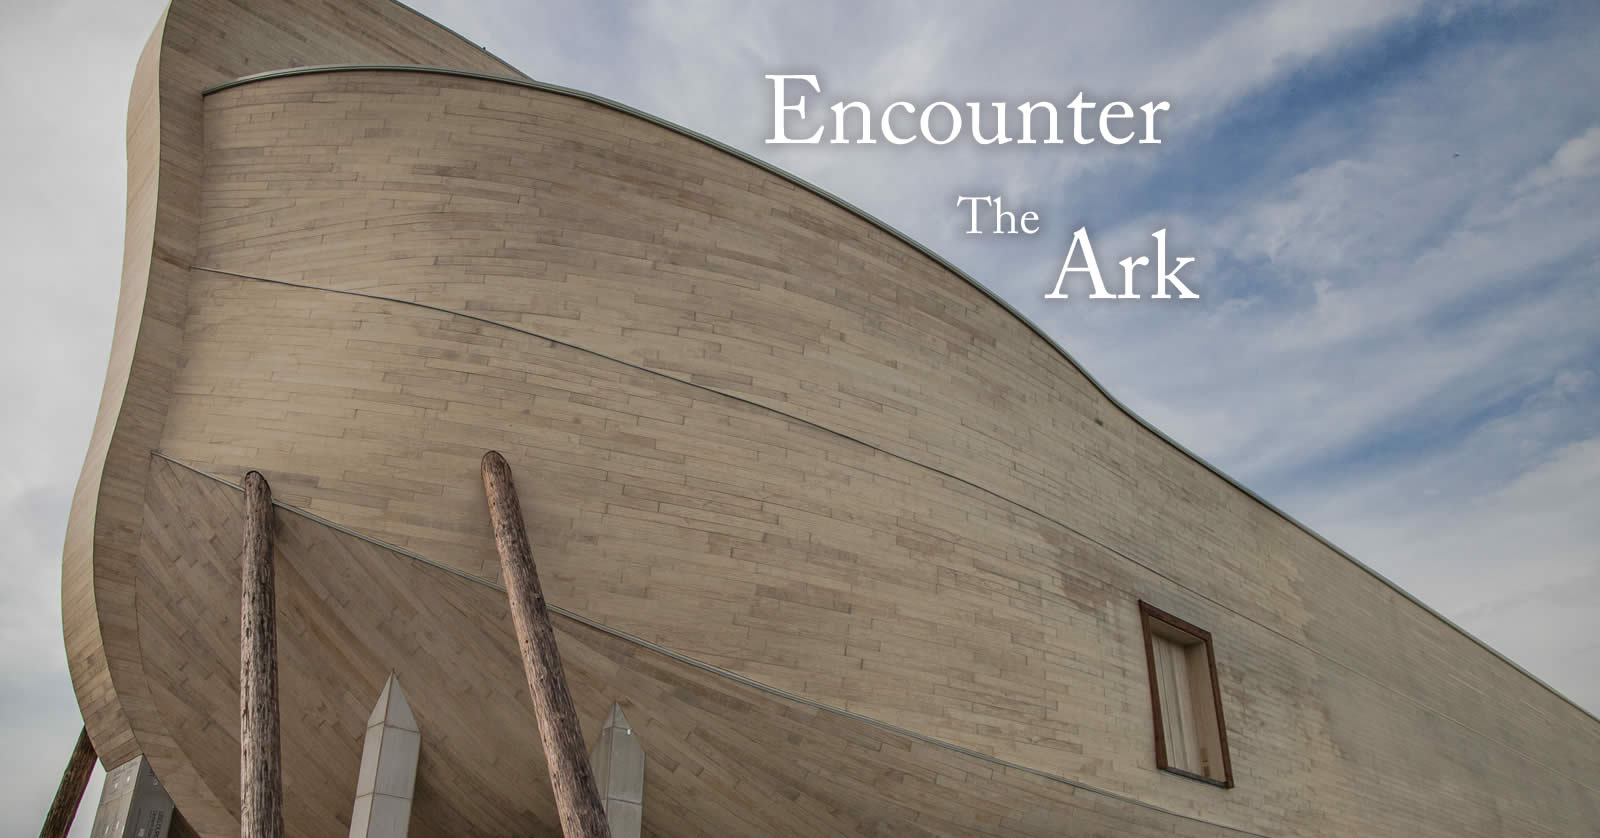 Have an encounter with the Ark